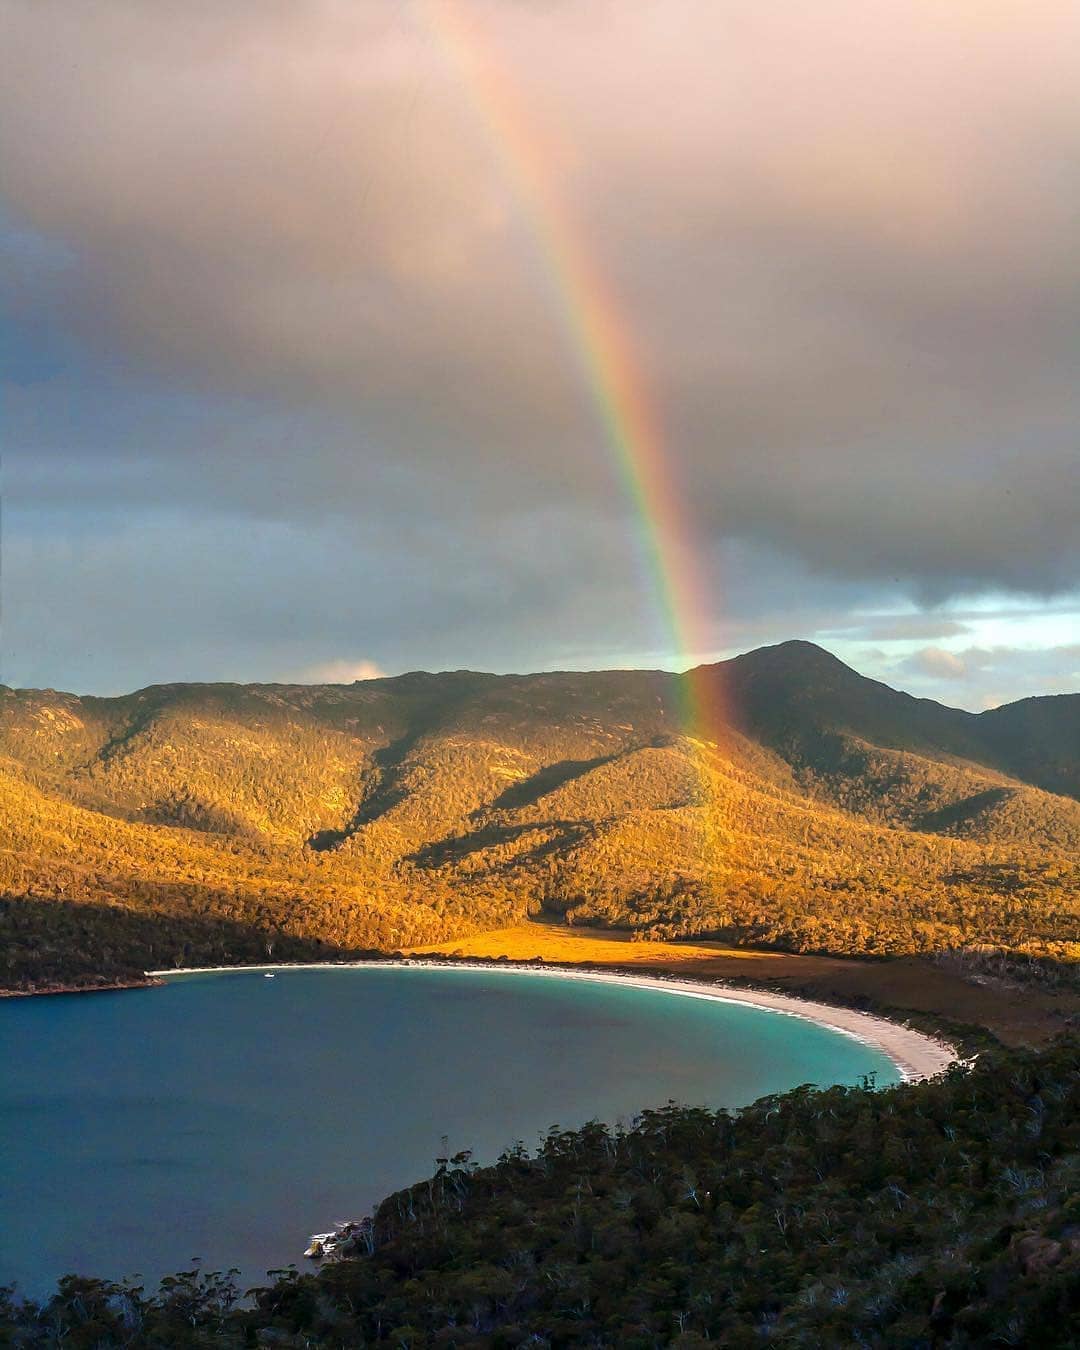 Reposted from @tasmaniagram An epic sunset plus a golden rainbow over Wineglass Bay, on the Freycinet Peninsula, thanks to @kateenno 🌅🌈

#tasmaniagram #instatasmania #instatassie #tasmania #tassie #tassiepics #wineglassbay #freycinetpeninsula #freycinet